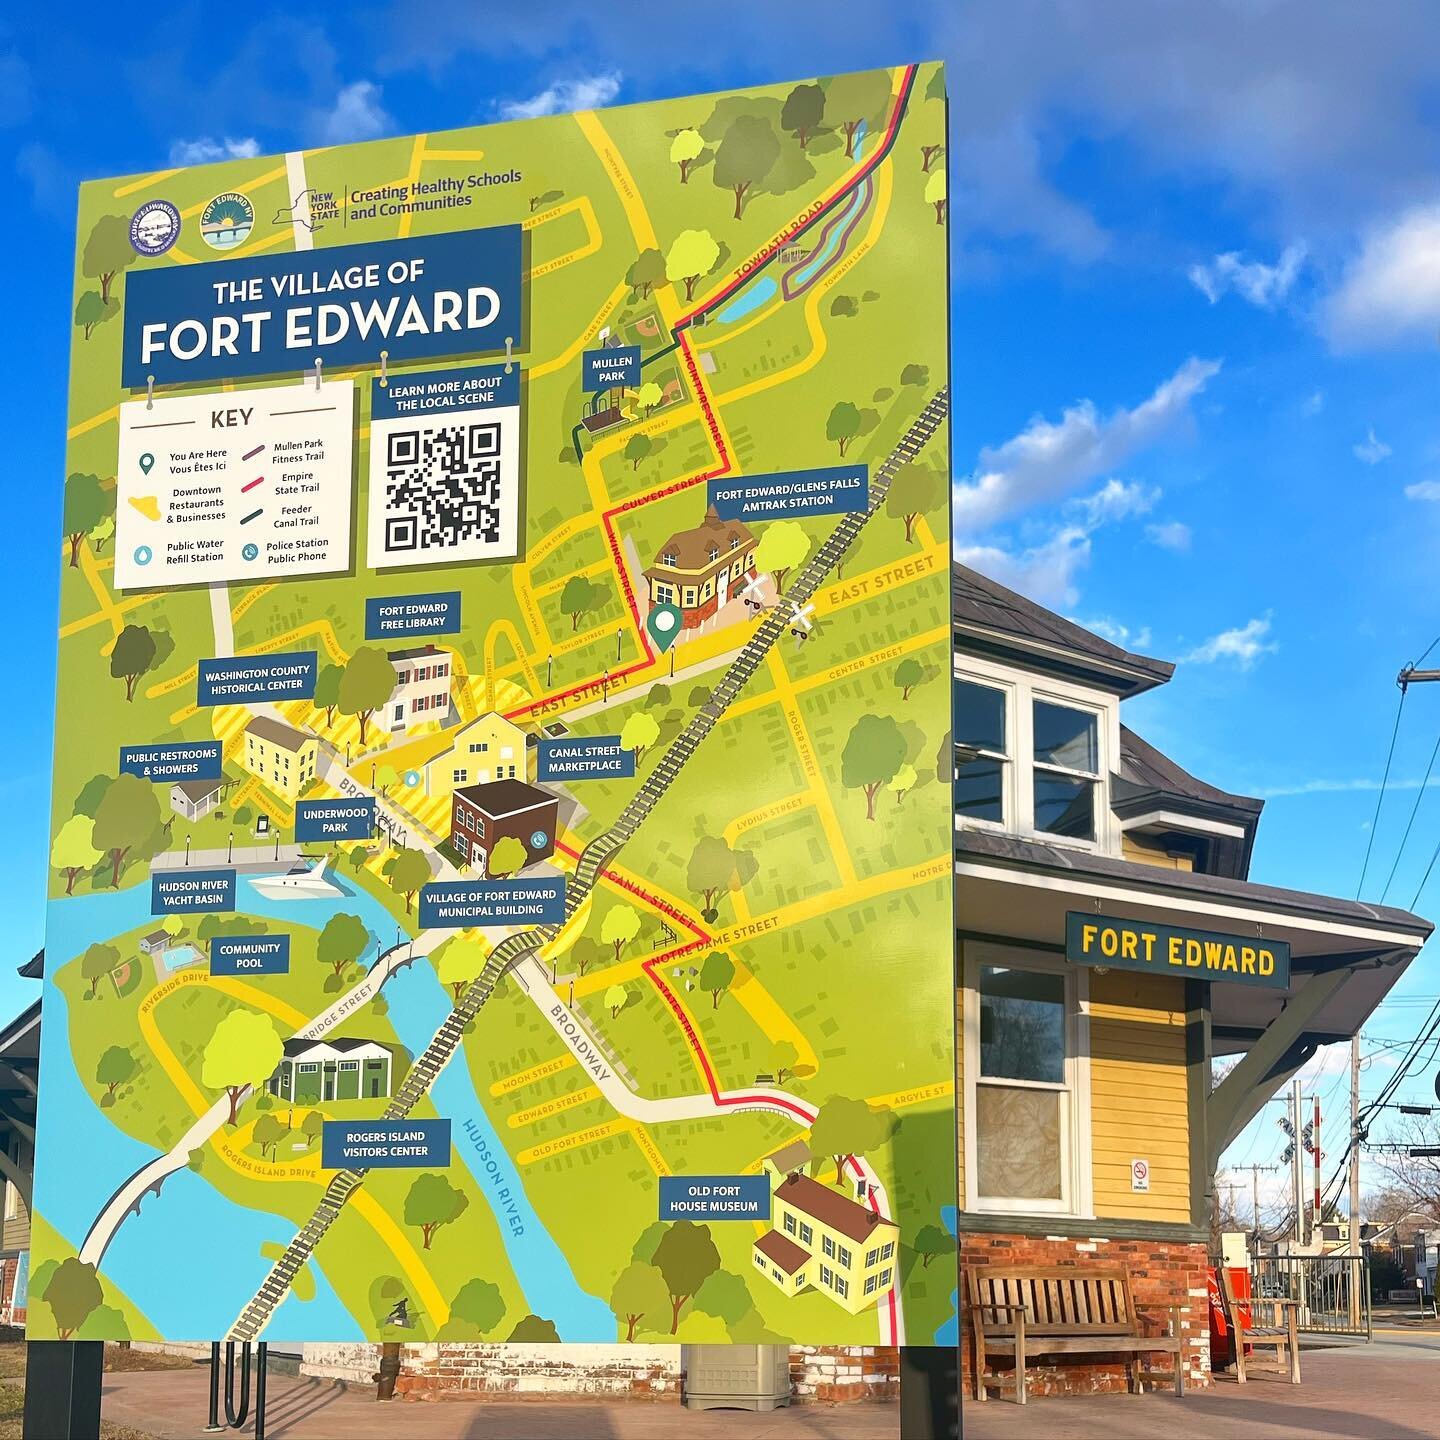 Swing by the train station to check out the recently installed and beautiful new map of the Village of Fort Edward! This is a great addition for cyclists riding along the Empire State Trail, people arriving in Fort Edward by train, and anyone else lo